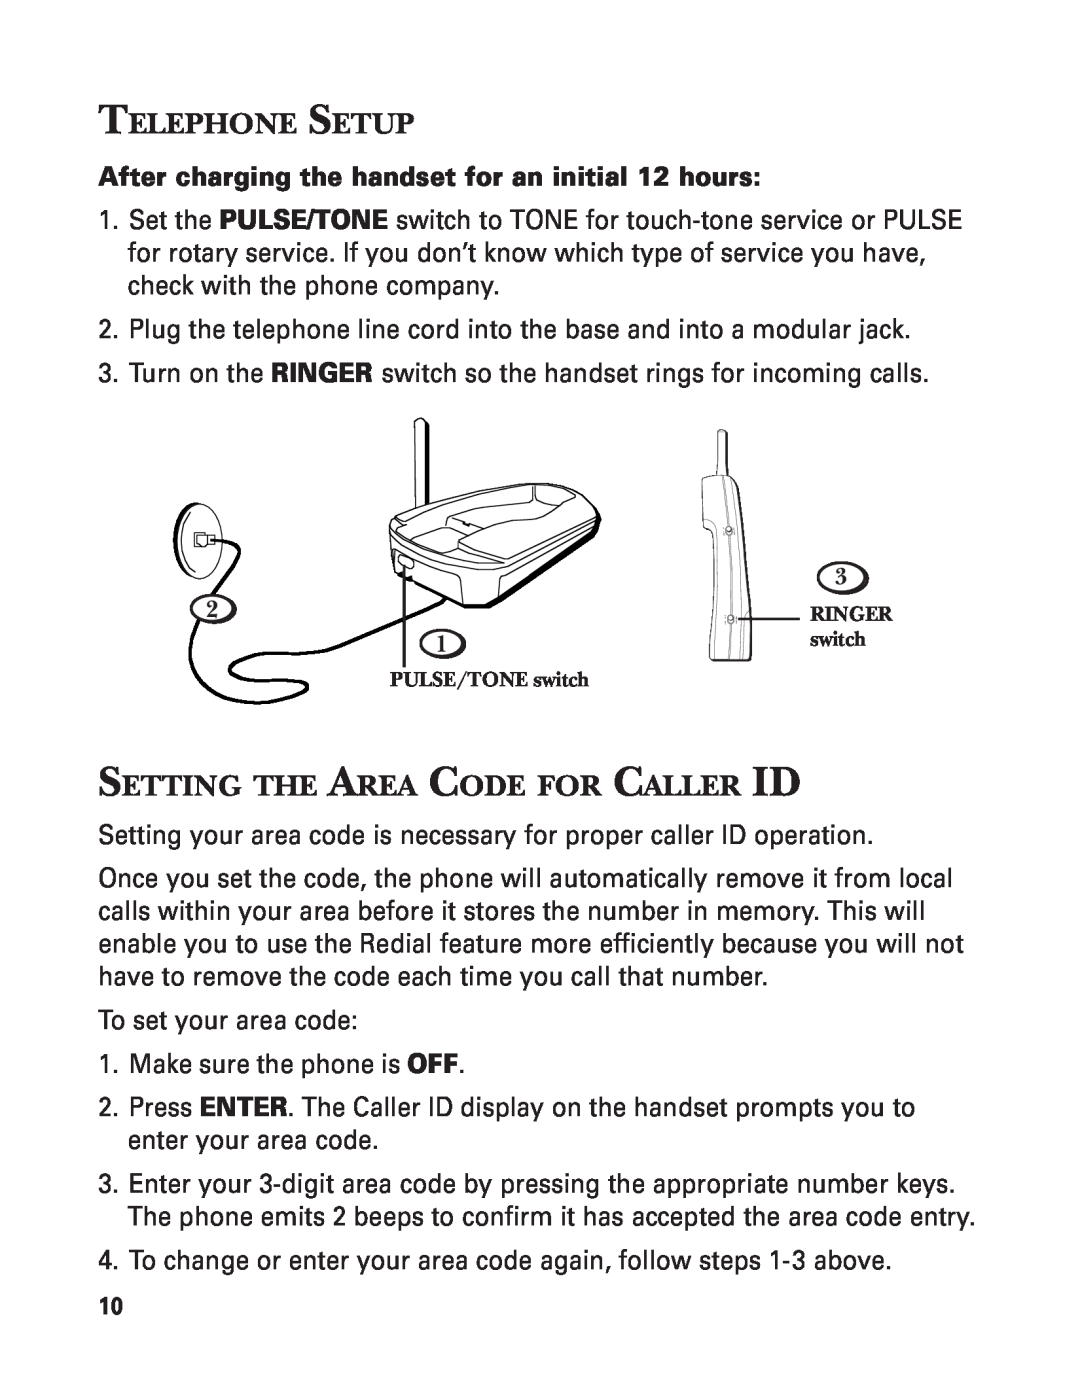 GE 2-9772 manual Telephone Setup, Setting The Area Code For Caller Id, After charging the handset for an initial 12 hours 